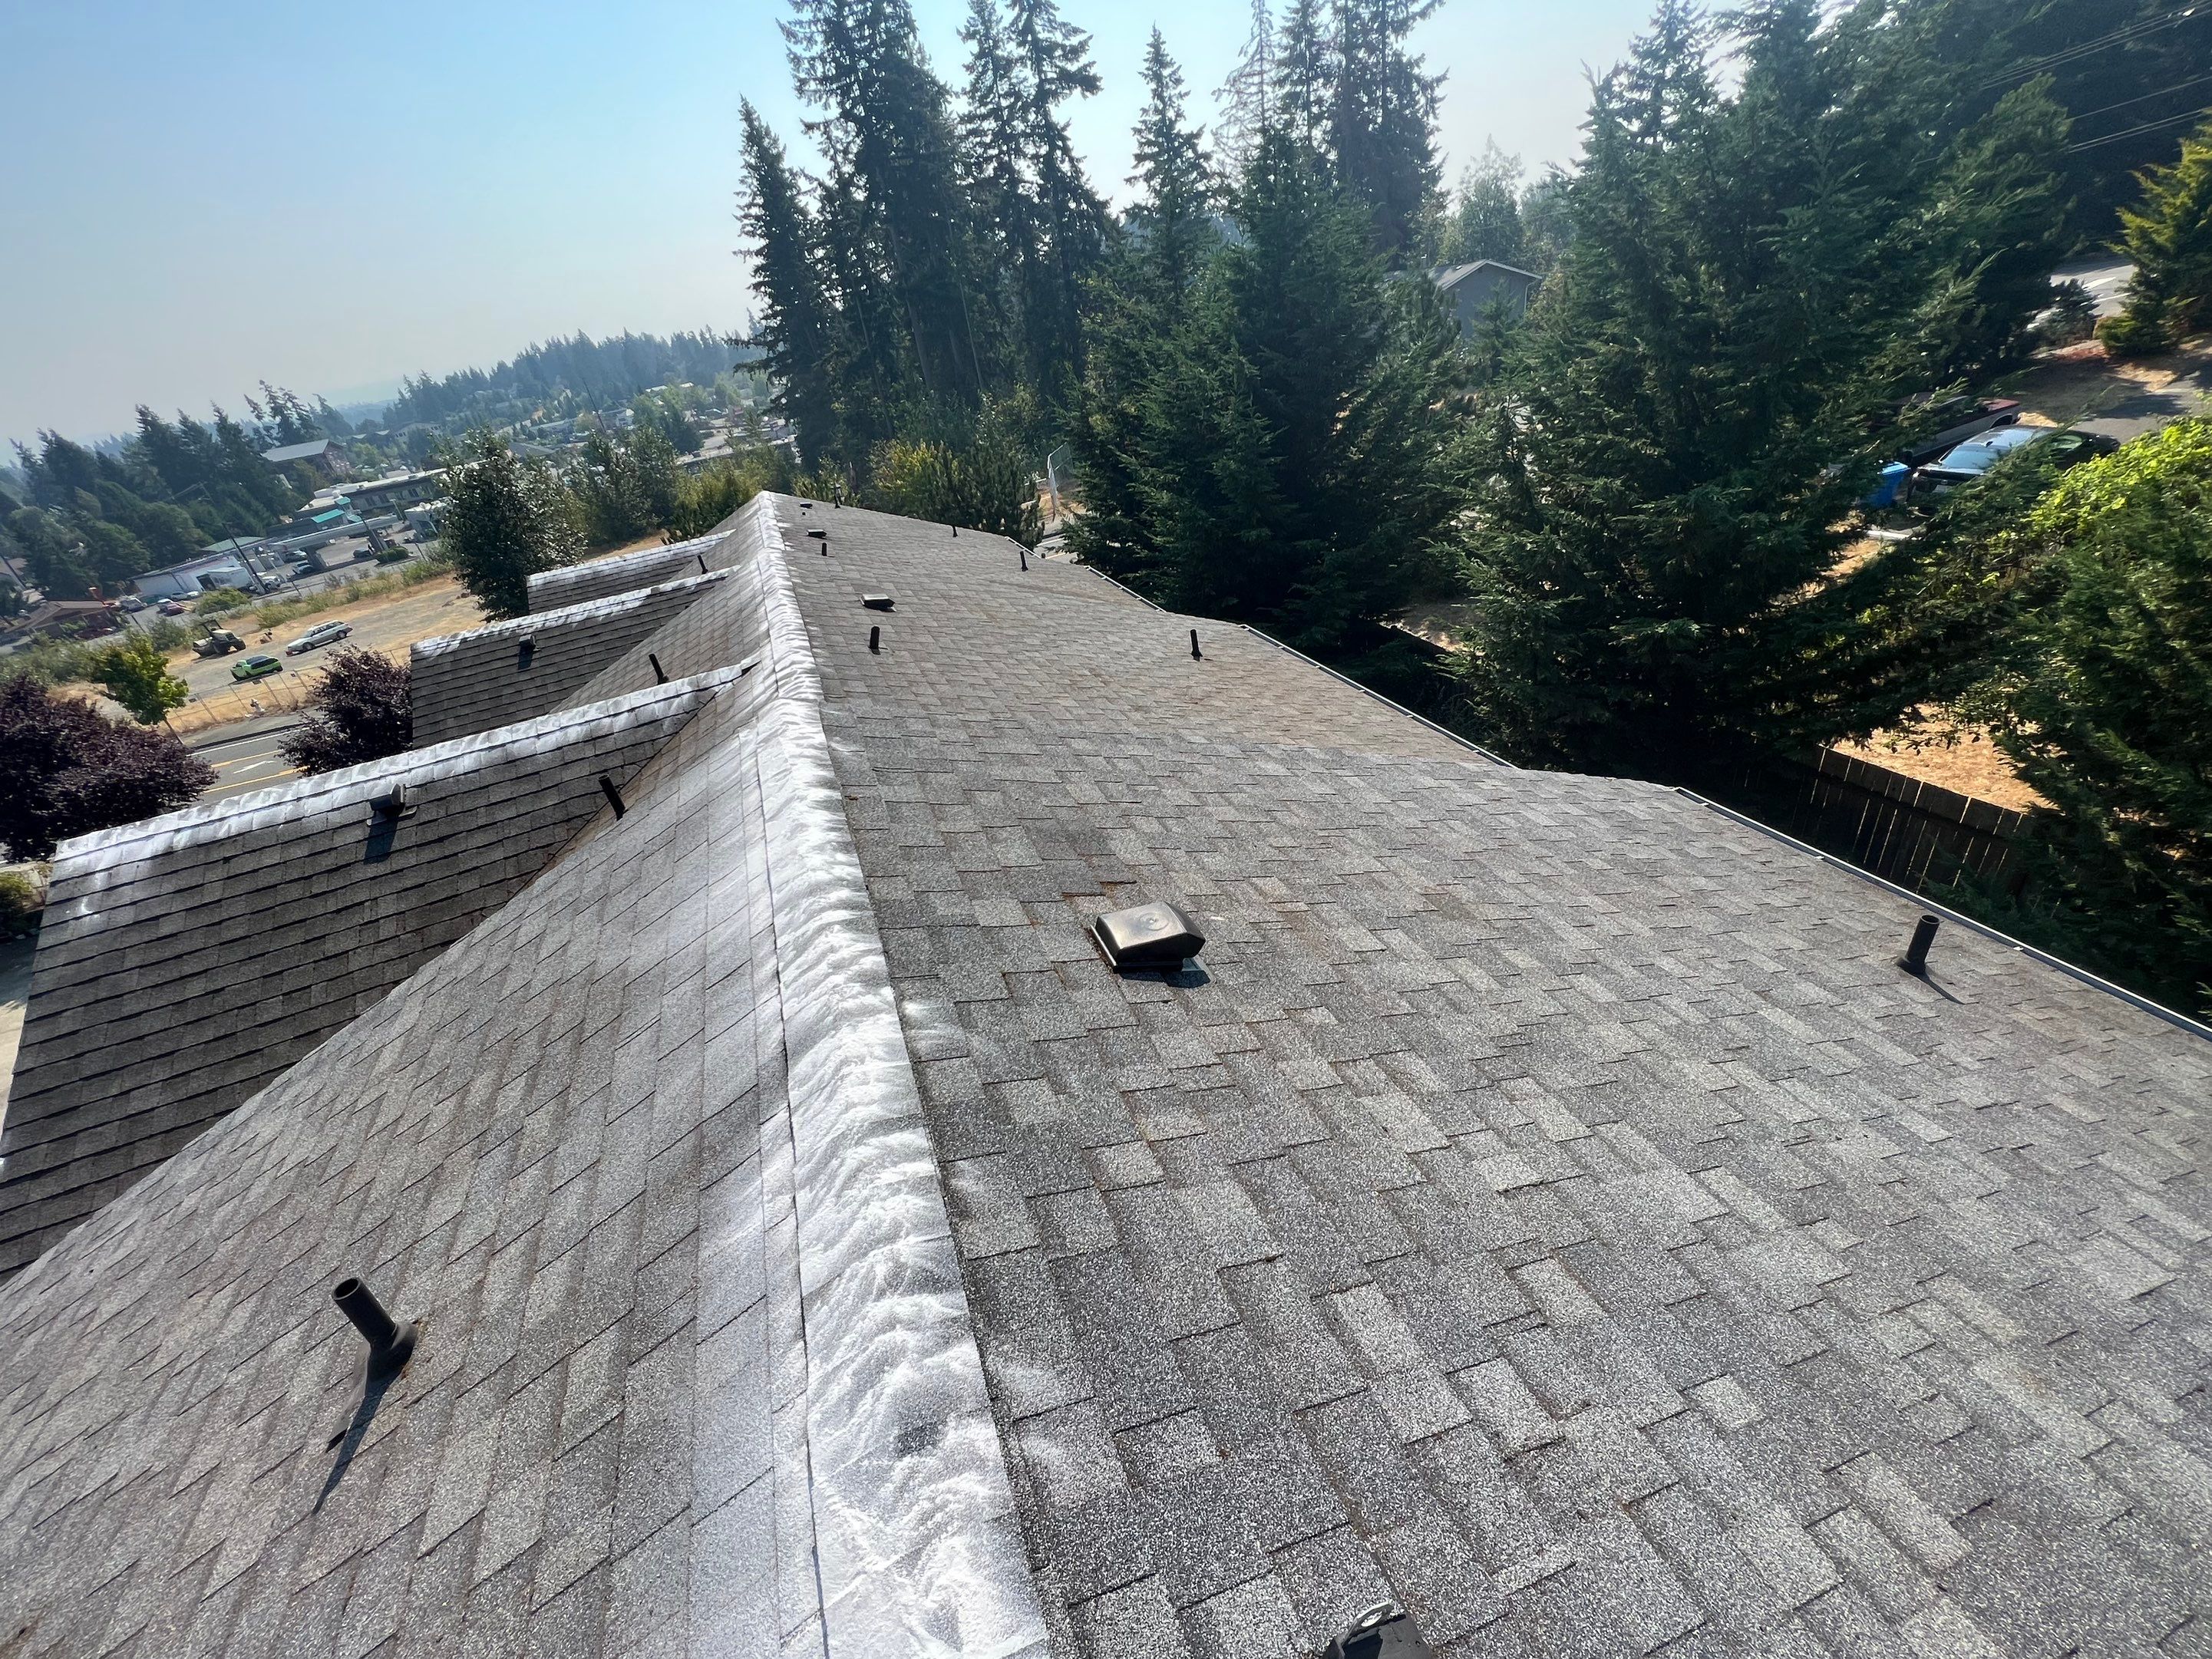 New clean residential roof in federal way with moss kill on it. Residential roof Benefits of Energy-Efficient Tips for Homes in High-Wind Areas